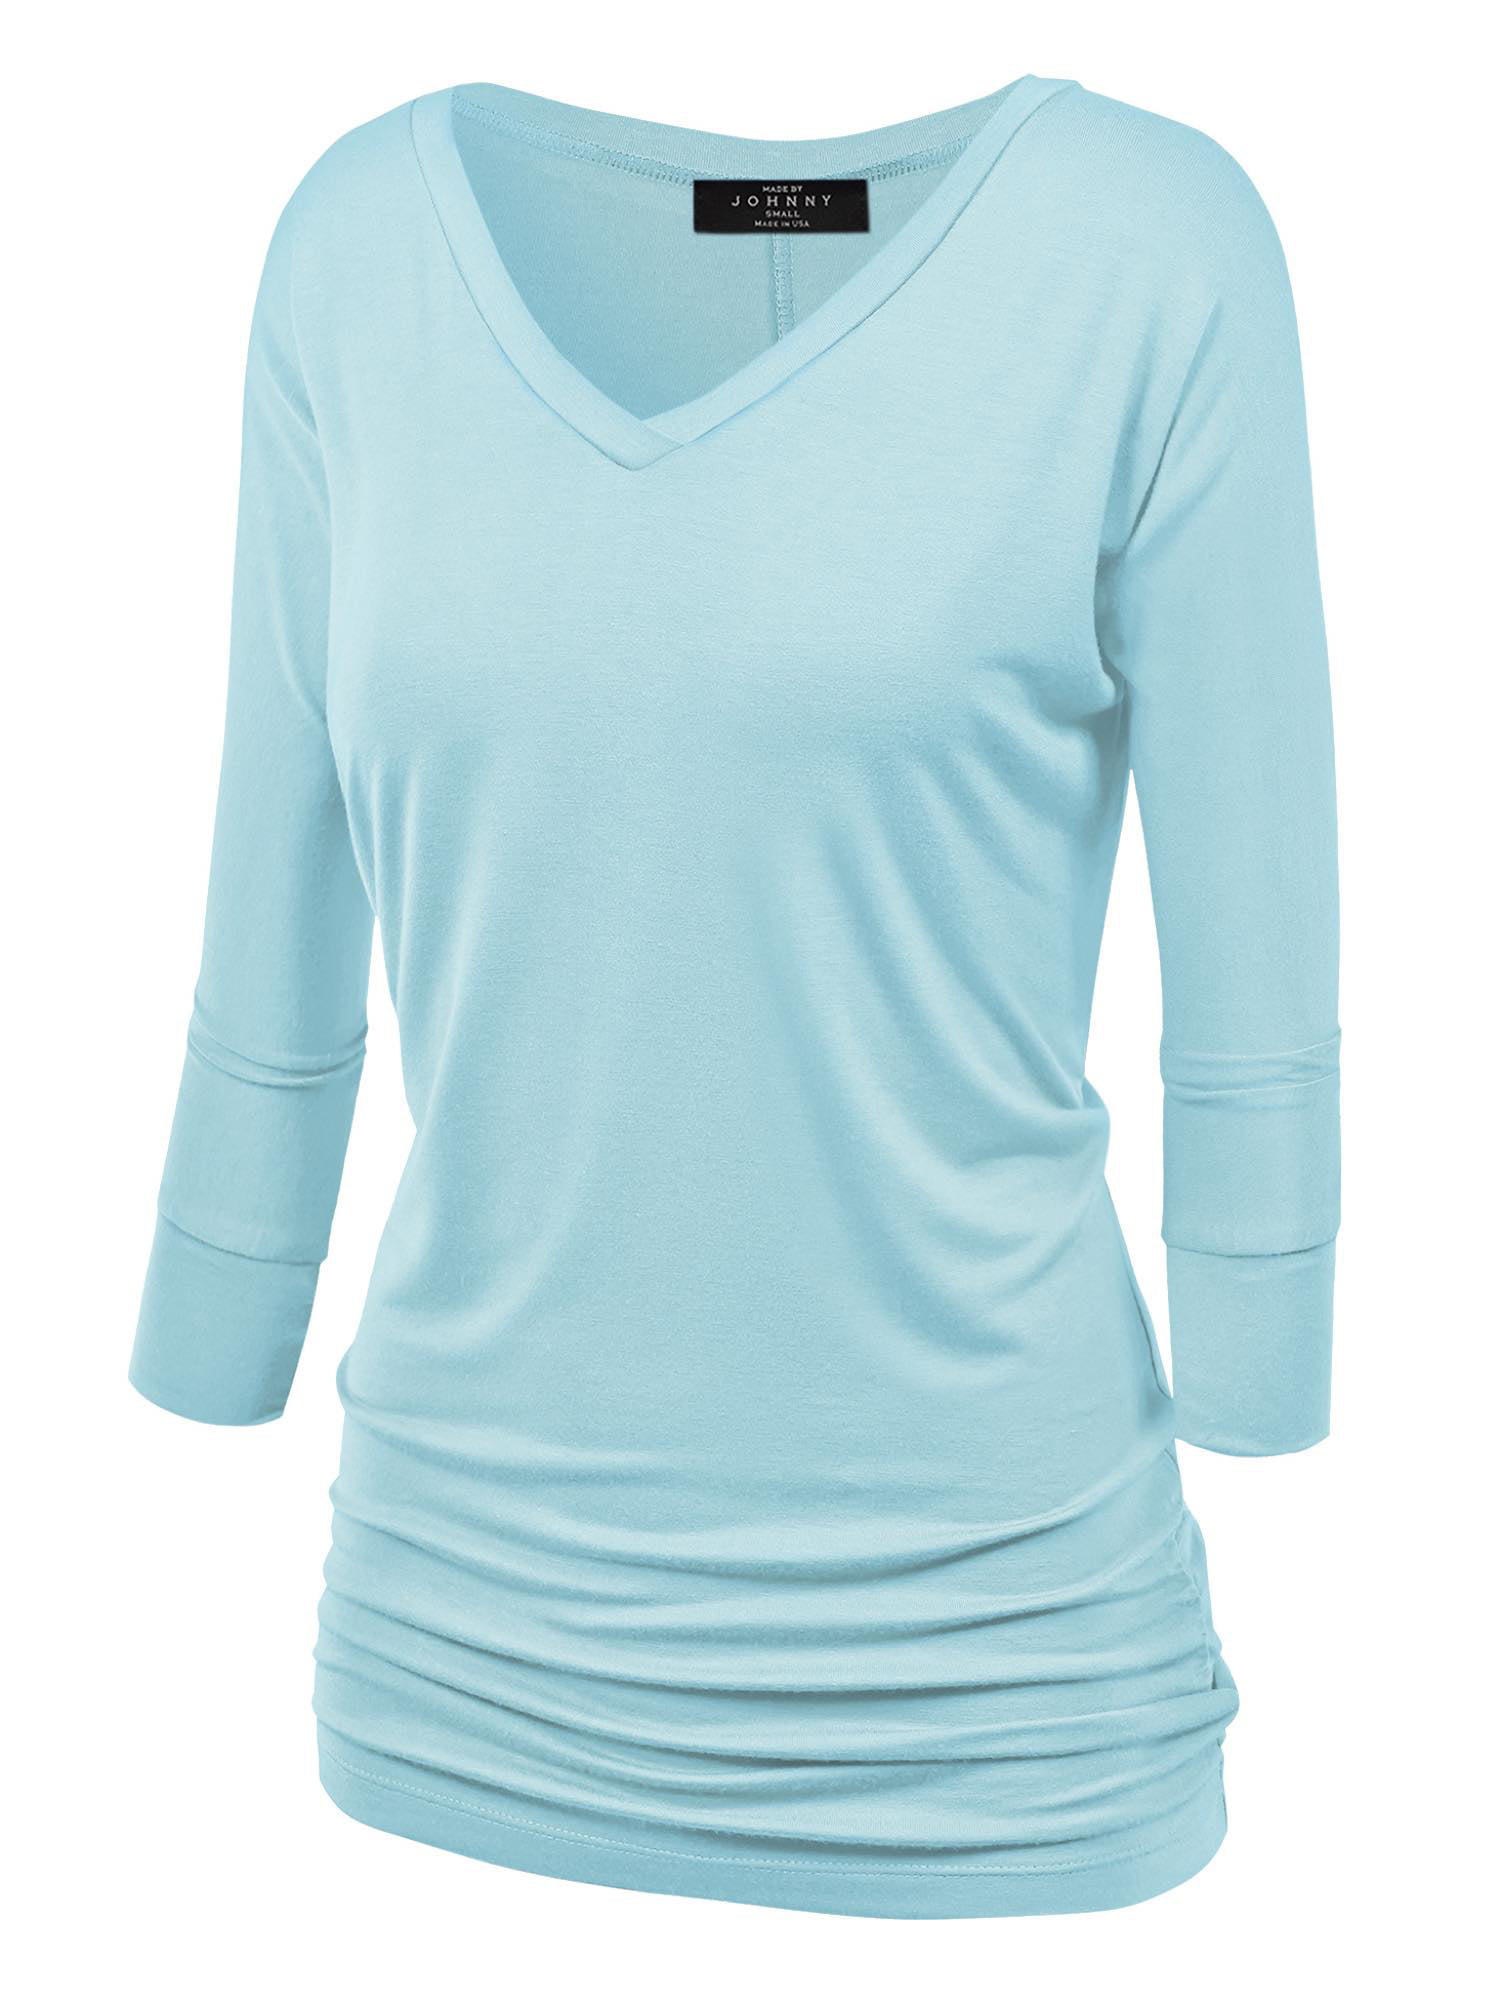 MBJ WT1036 Womens V Neck 3/4 Sleeve Dolman Top with Side Shirring M ...